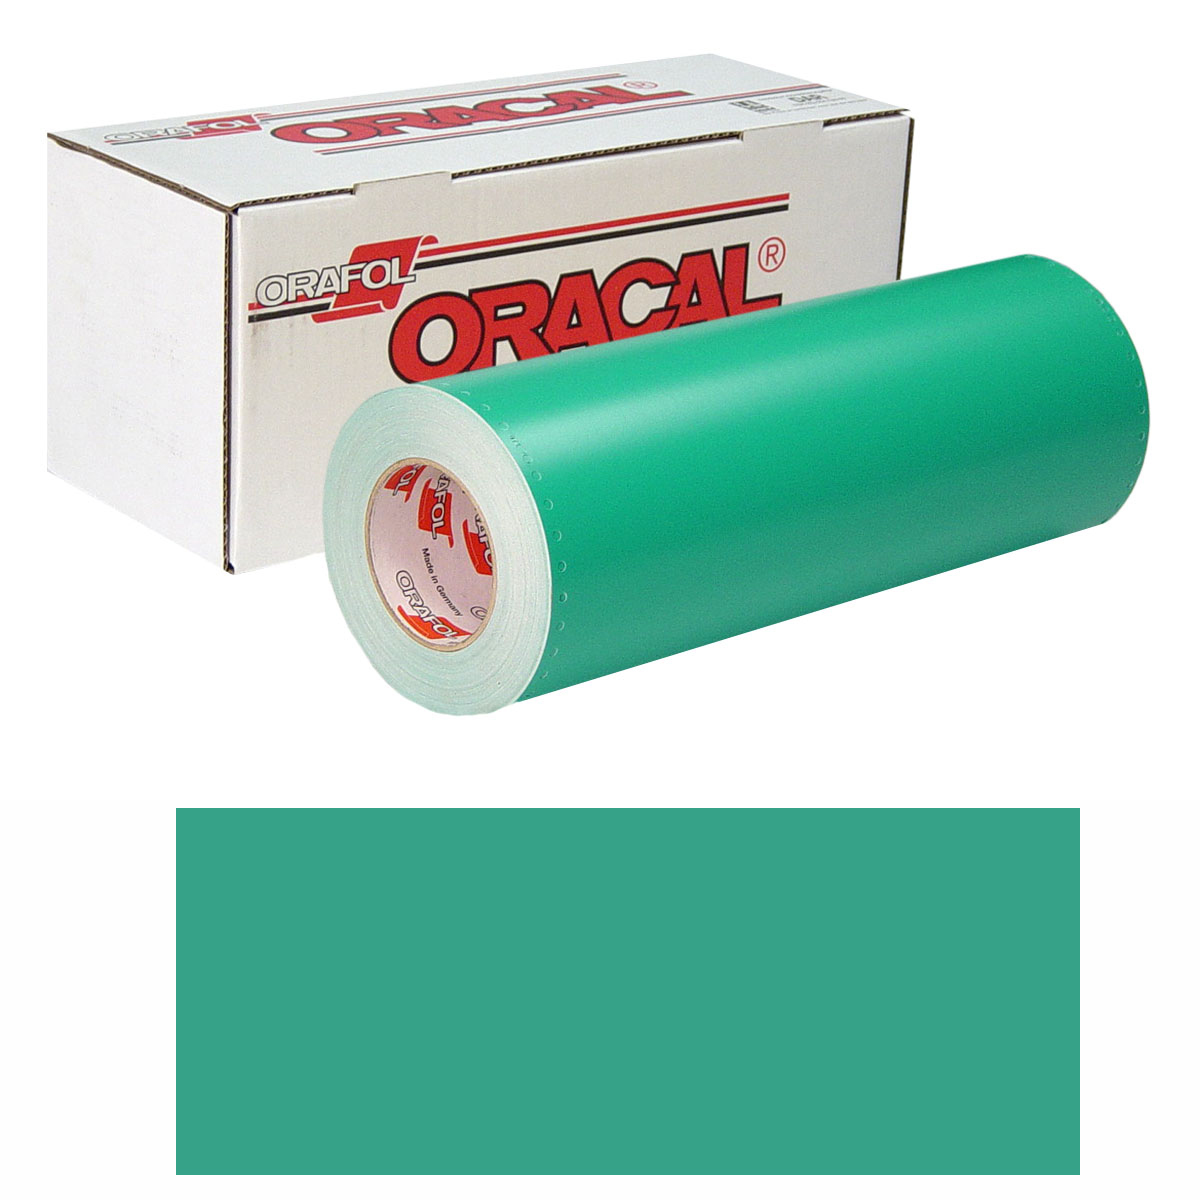 ORACAL 8500 Unp 24in X 50yd 009 Middle Green